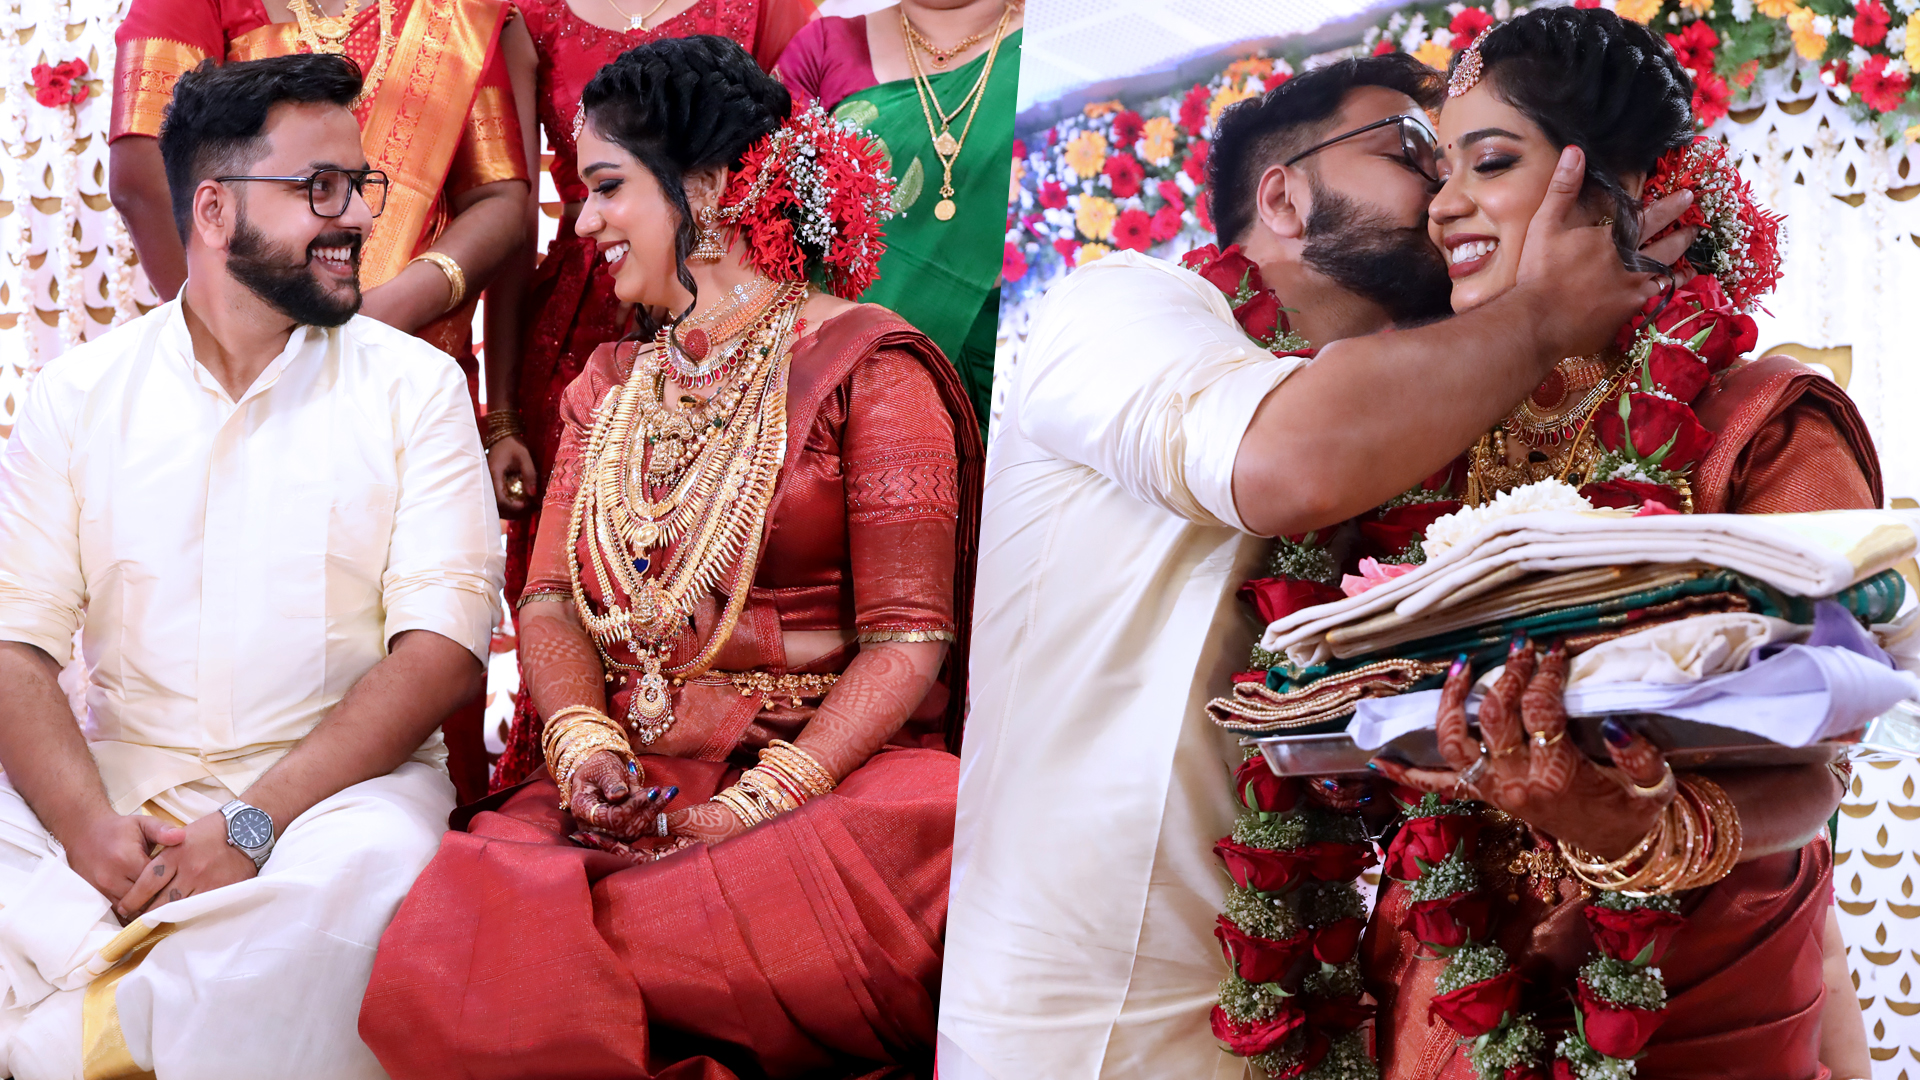 The daughter-in-law of the family lamp, Dr.  Ananya is now married to her daughter-in-law, Athira Madhav